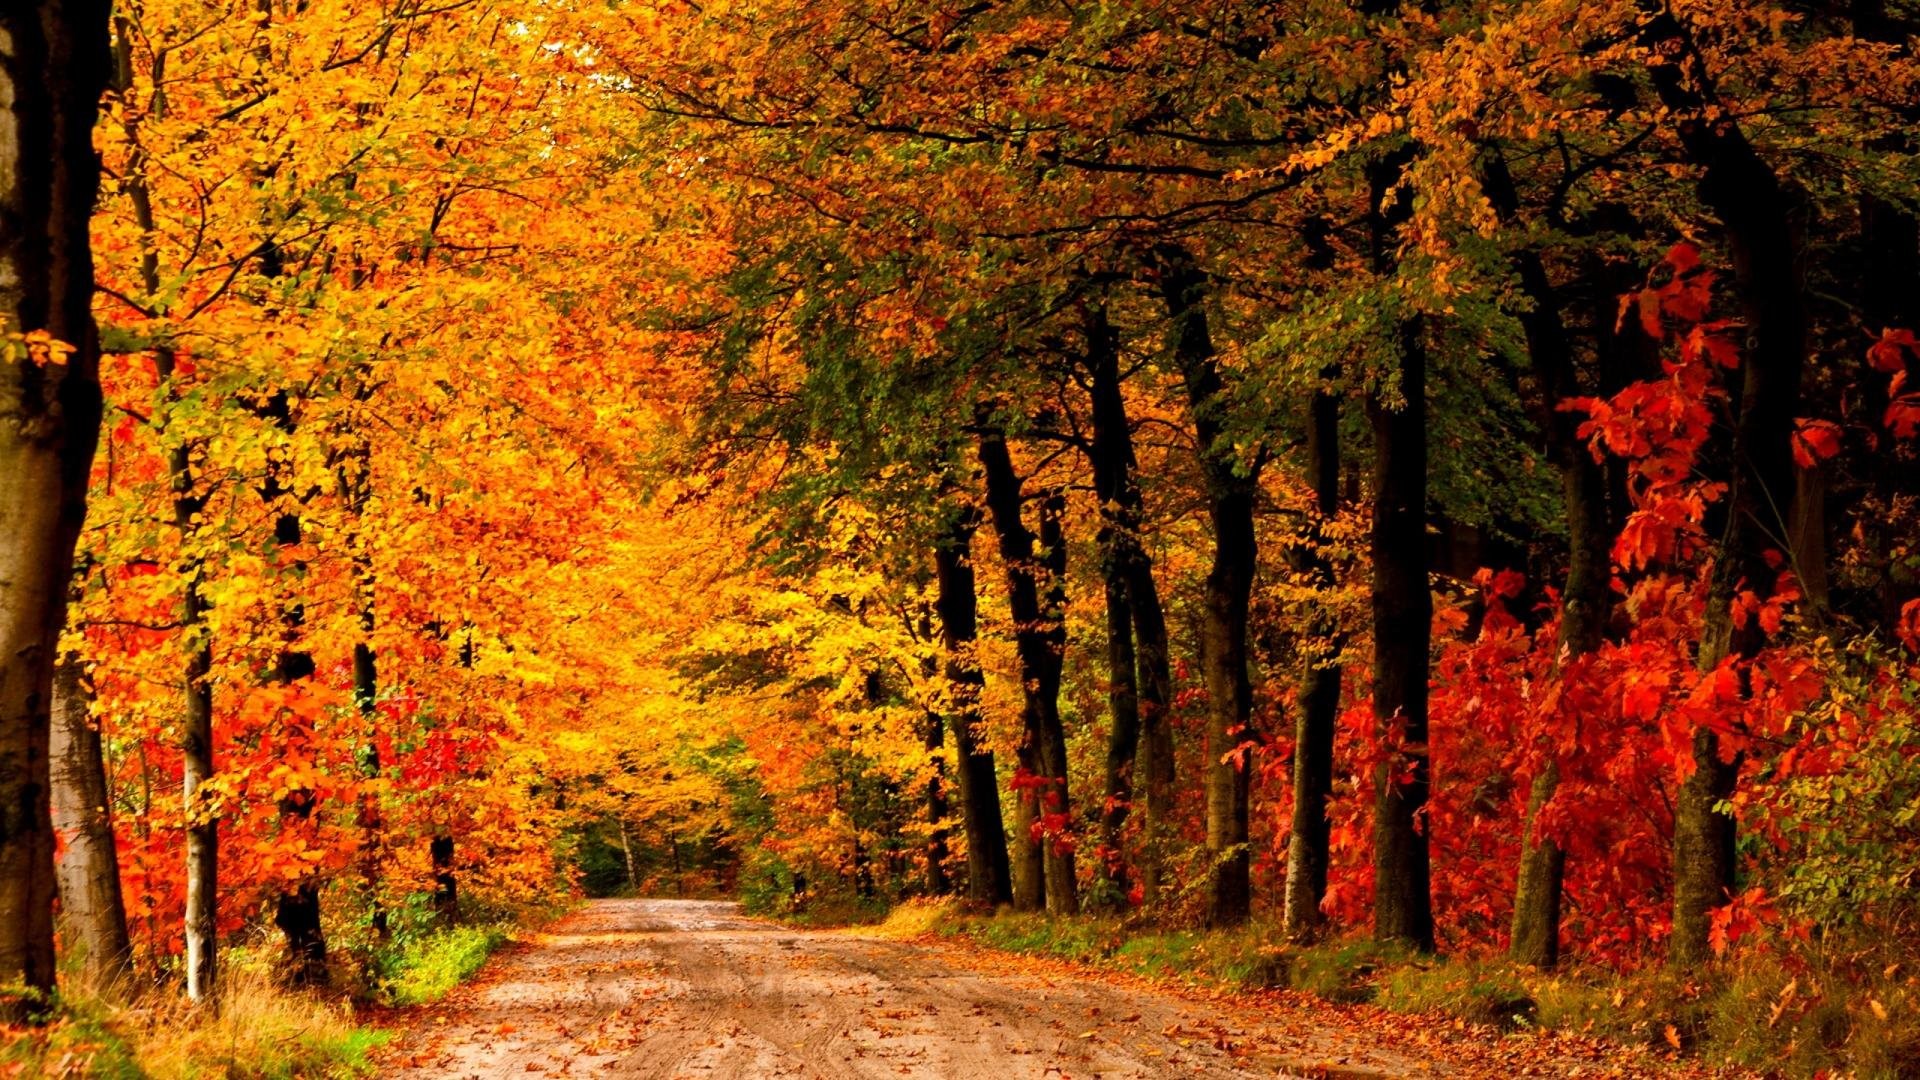 Forest Path In Autumn - HD Wallpaper 